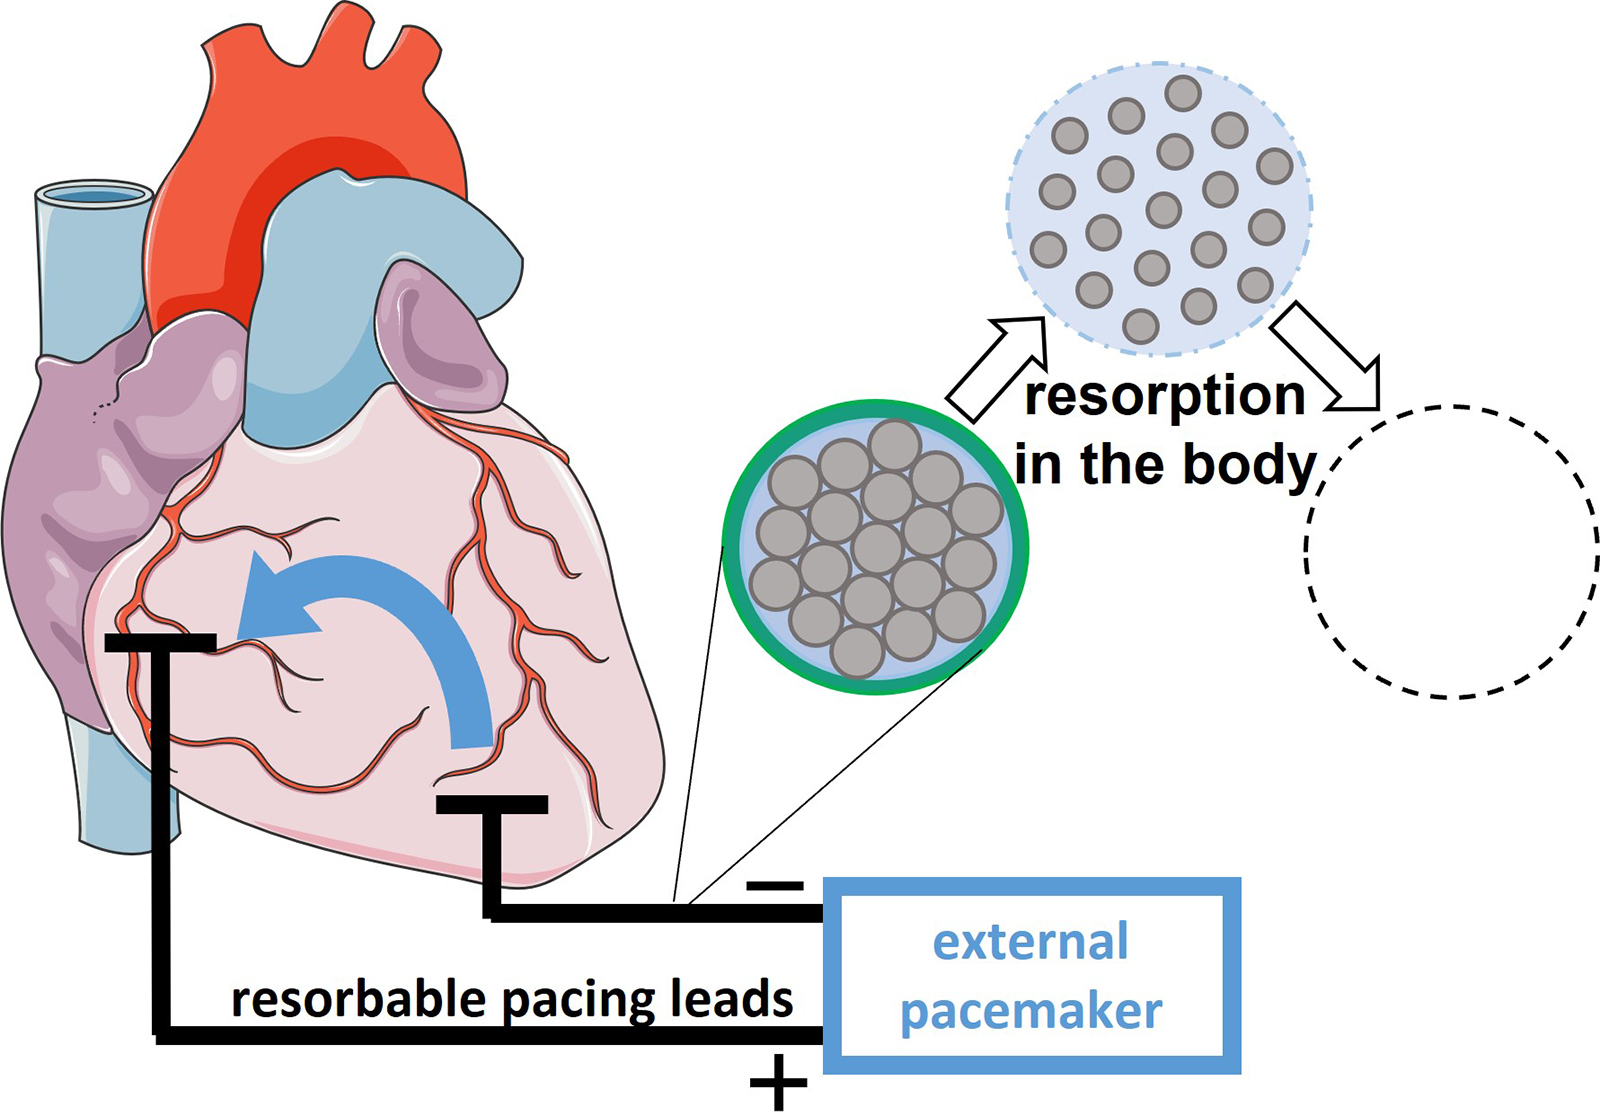 After the postoperative monitoring period, which lasts a few days, the resorbable pacing leads can remain in the body, where they slowly degrade.